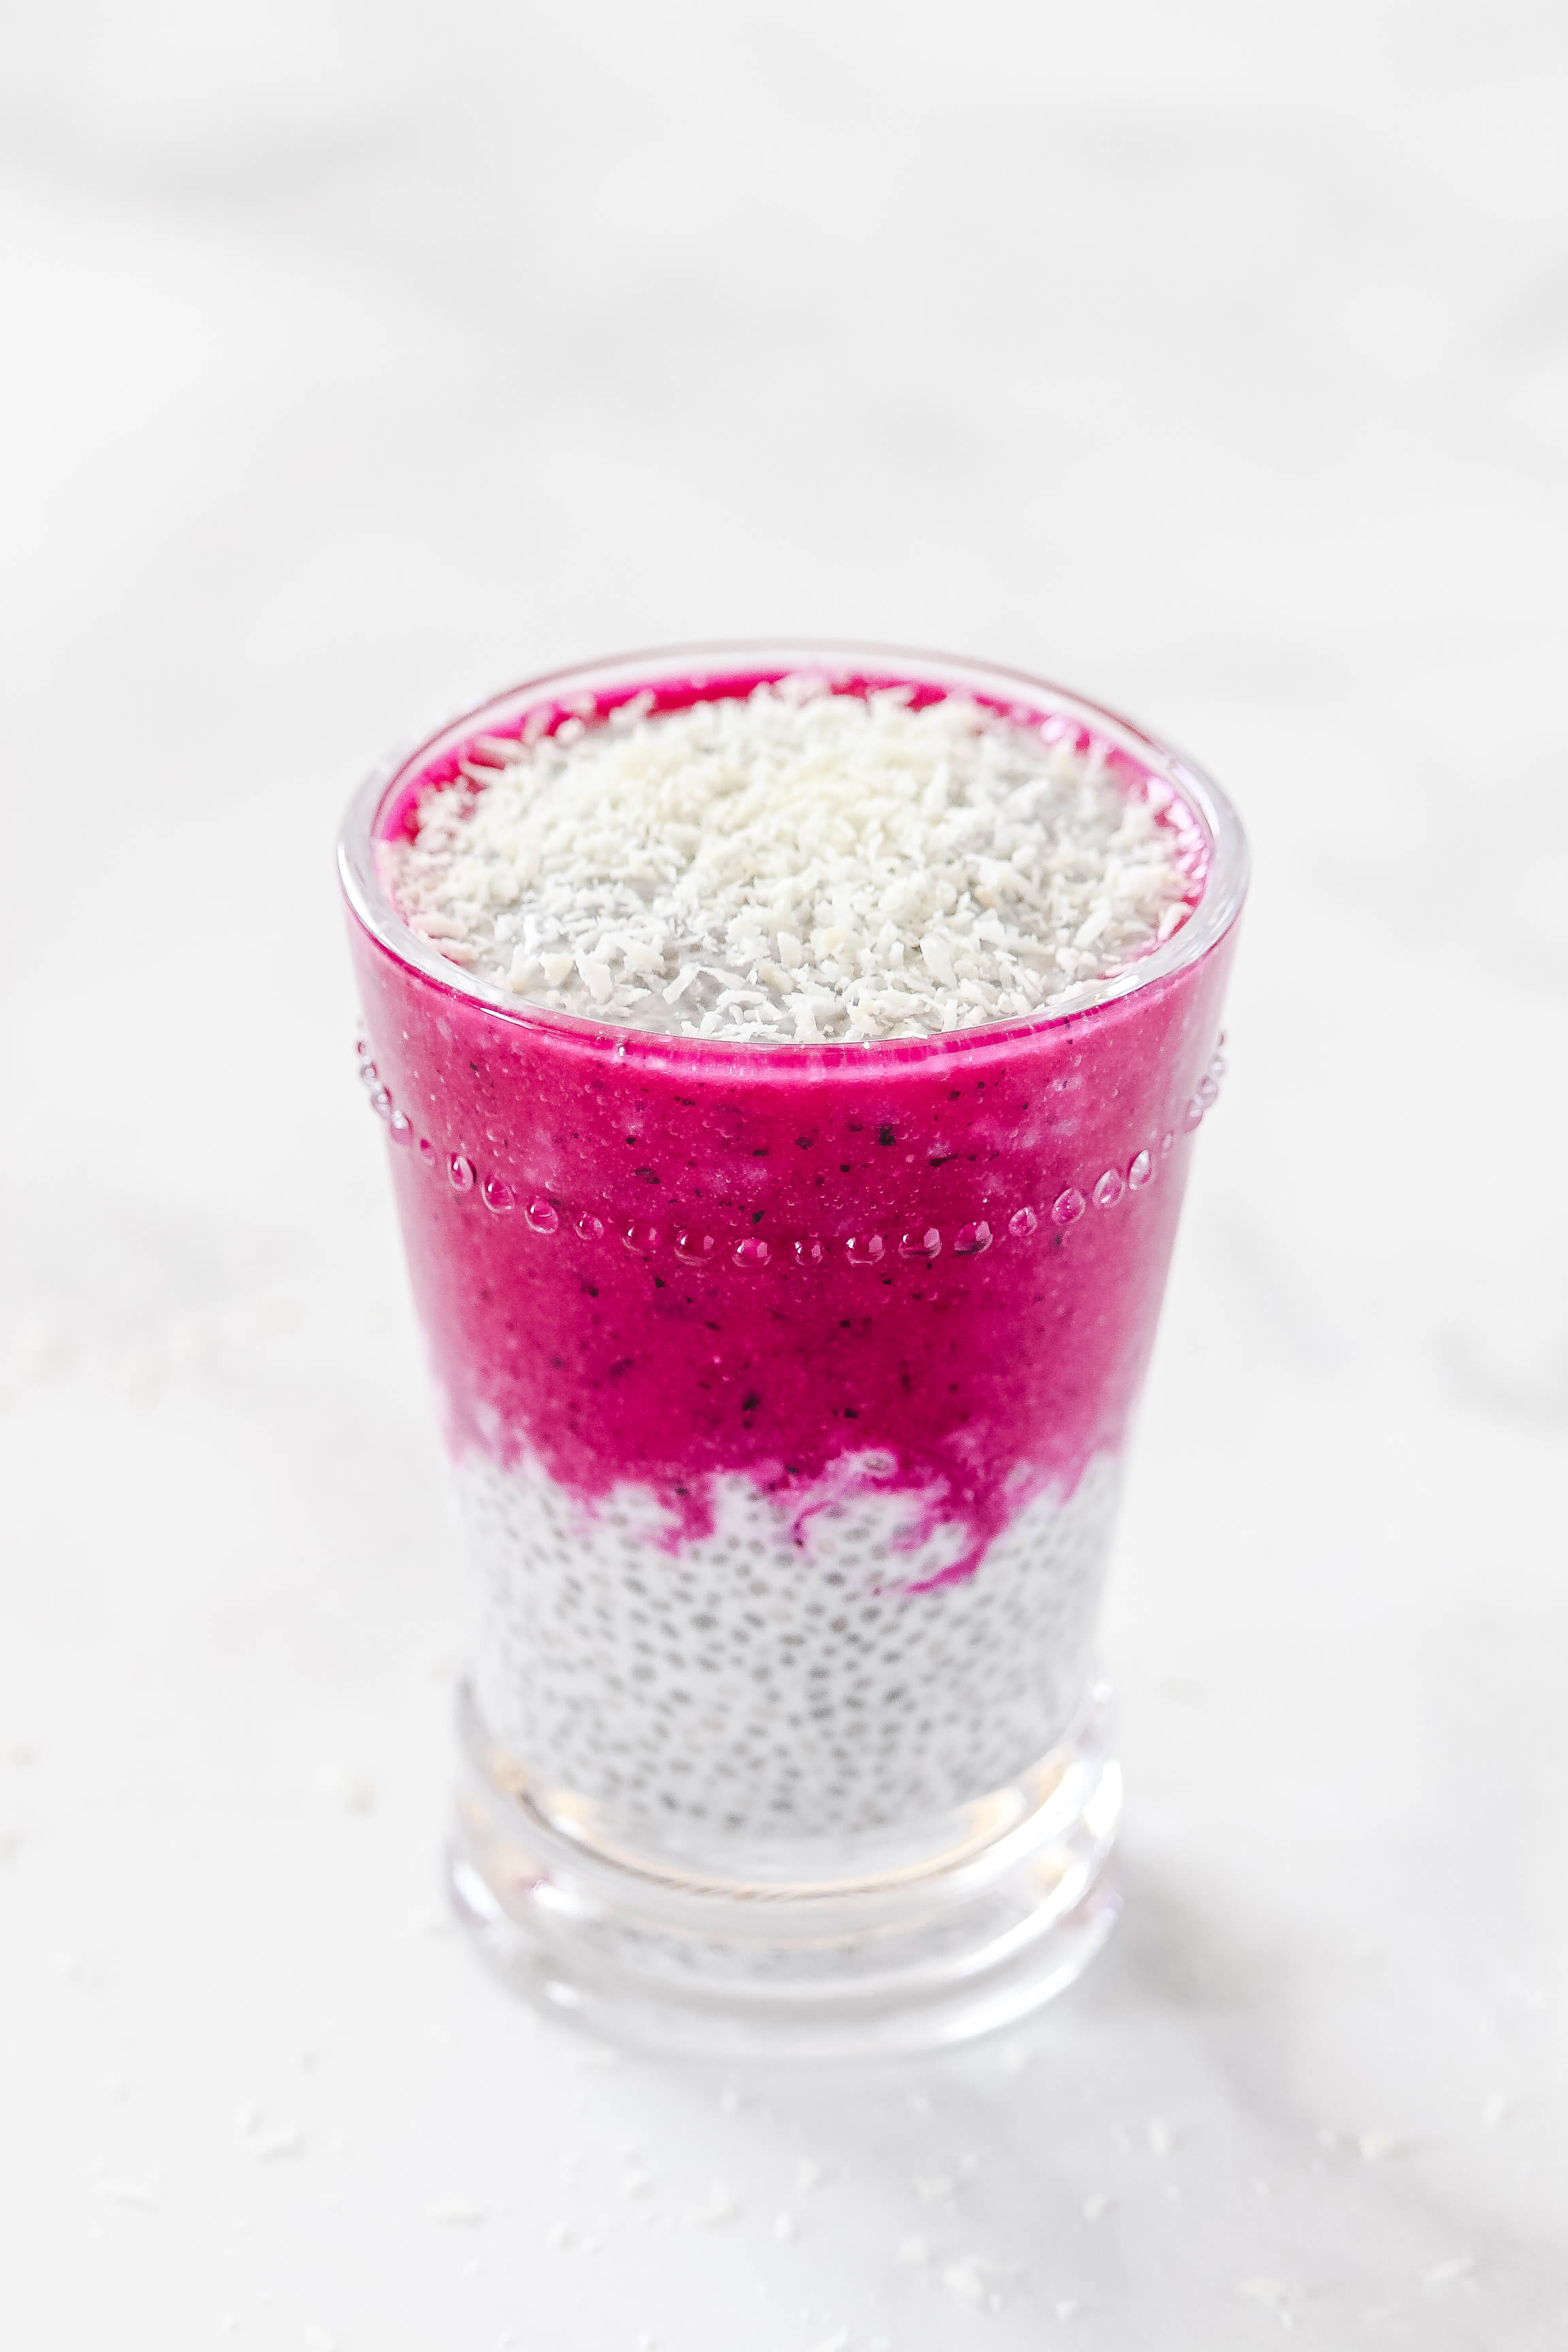 Vertical image of Gluten-Free Vegan Pitaya Dragon Fruit Chia Seed Pudding in a glass on a white marble surface